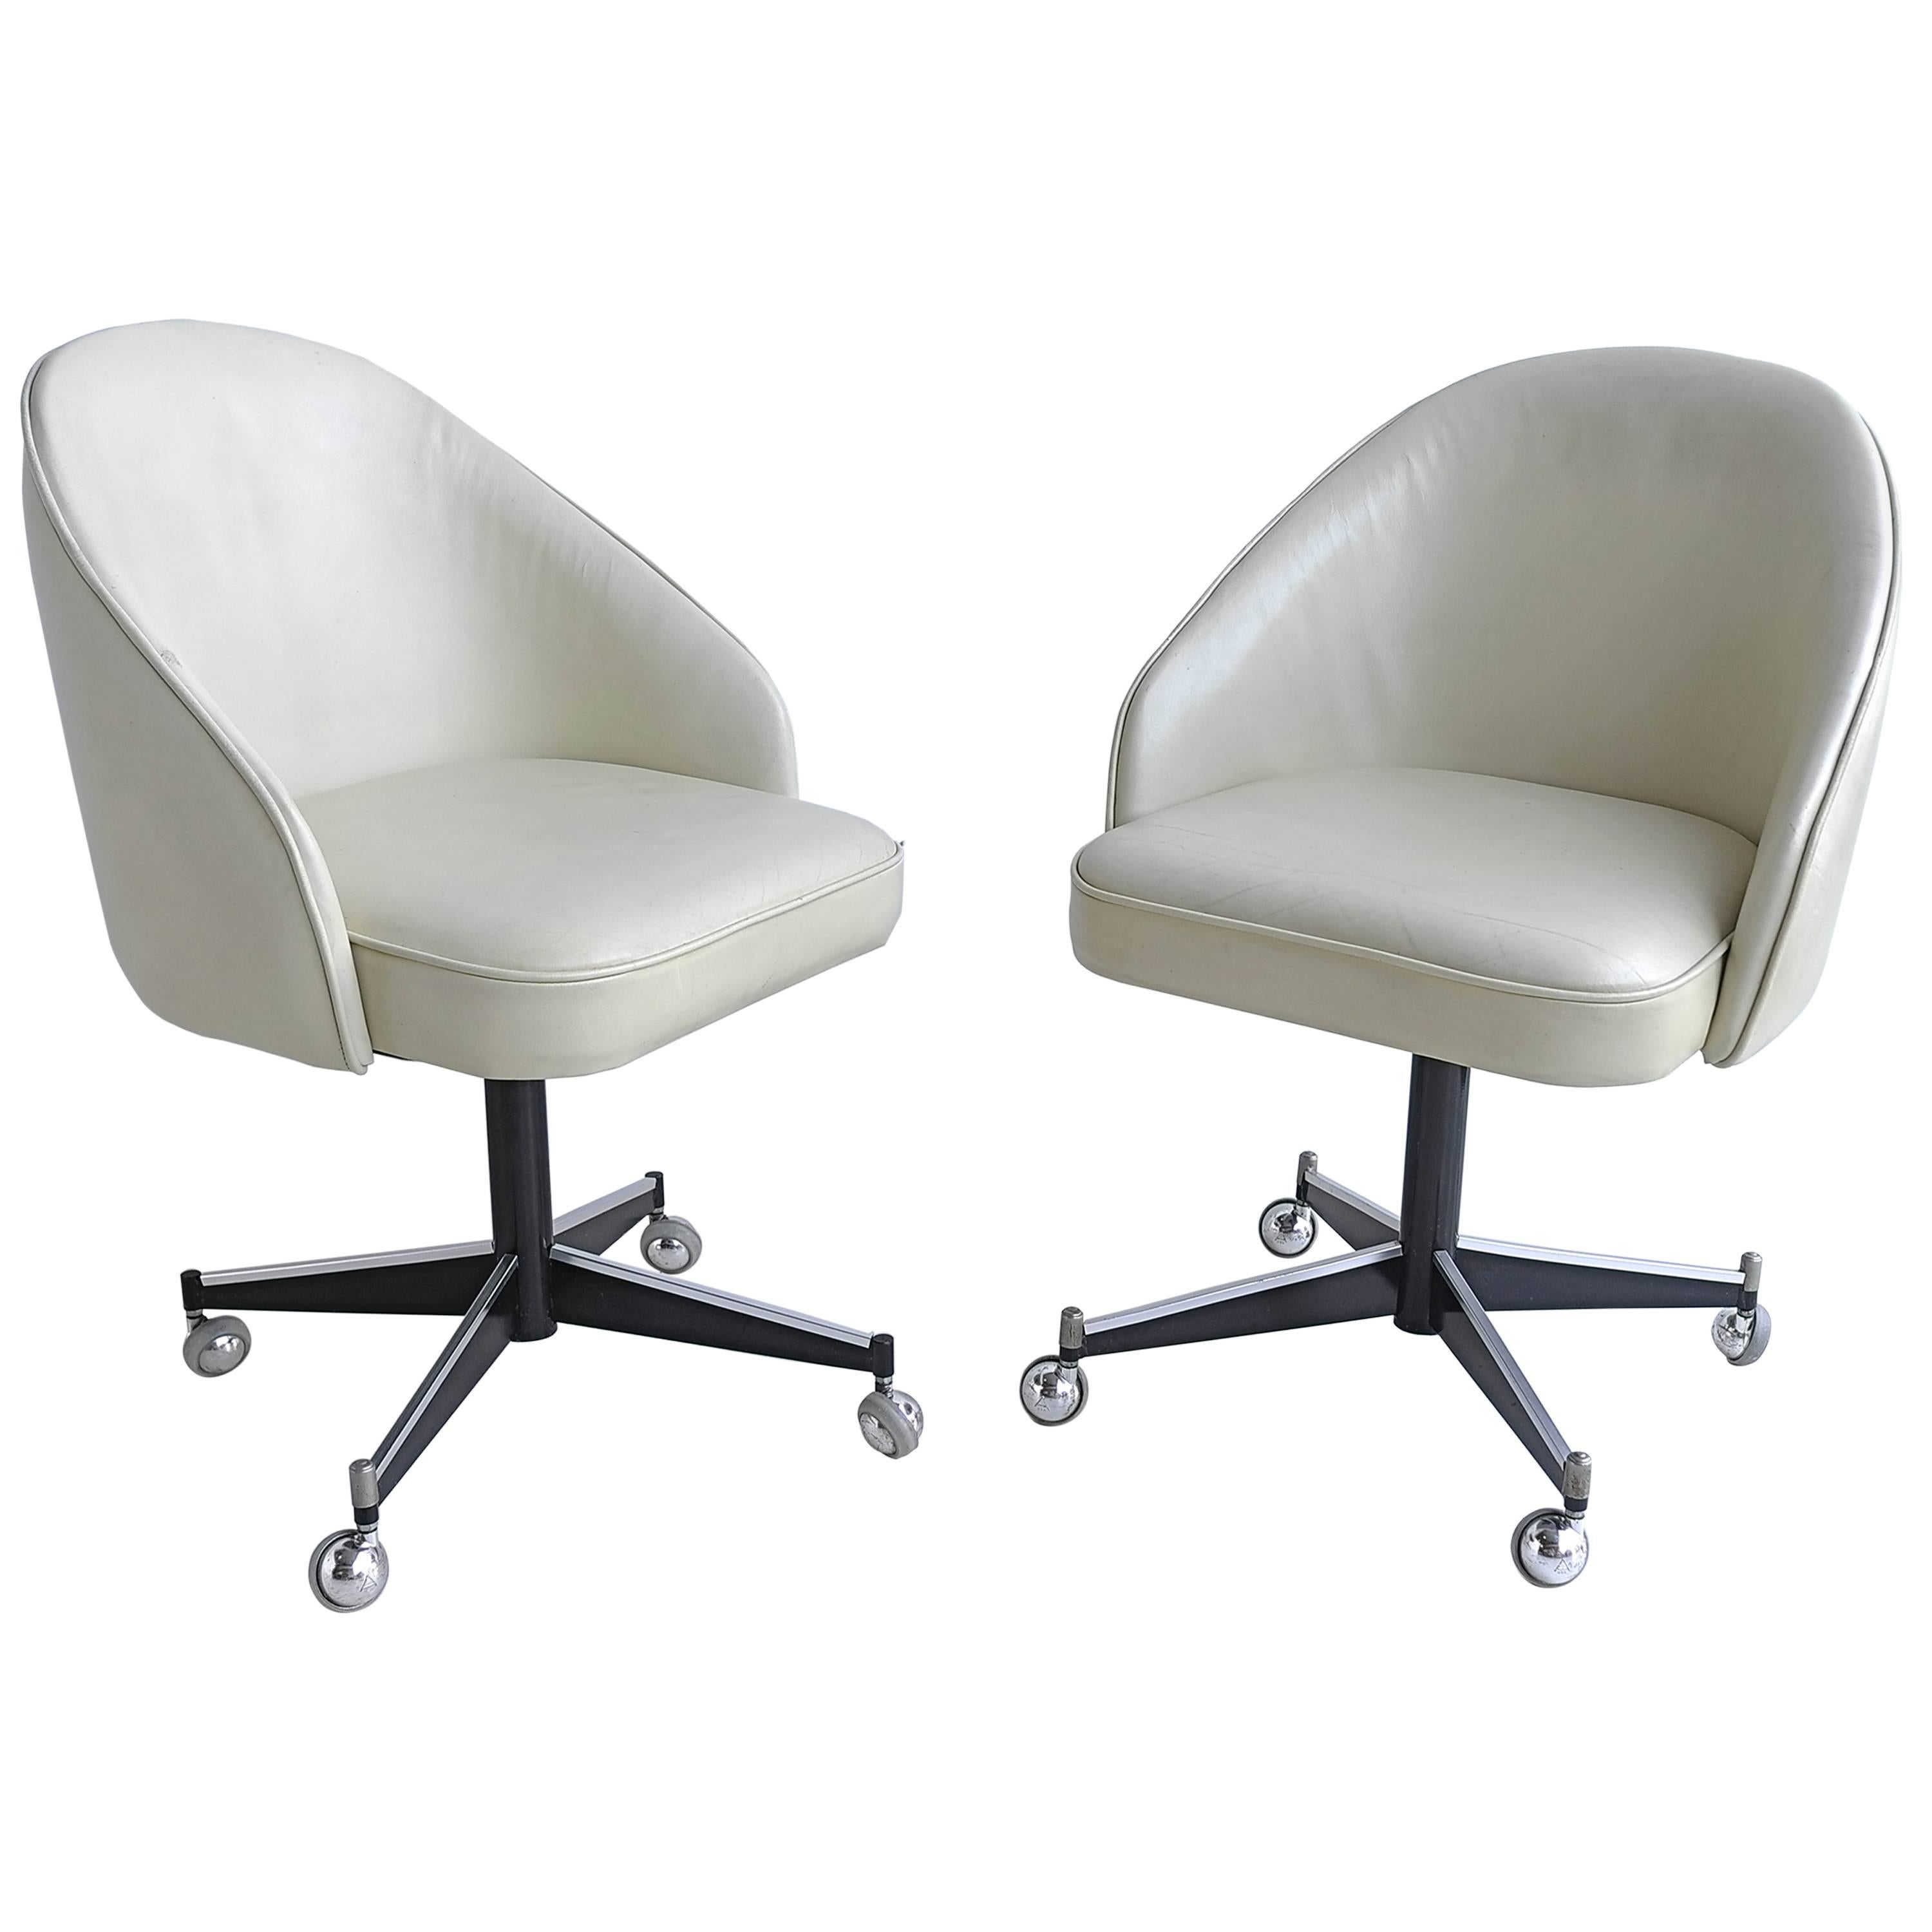 Pair of White Leather Lady Desk Chairs, Italy, 1950s